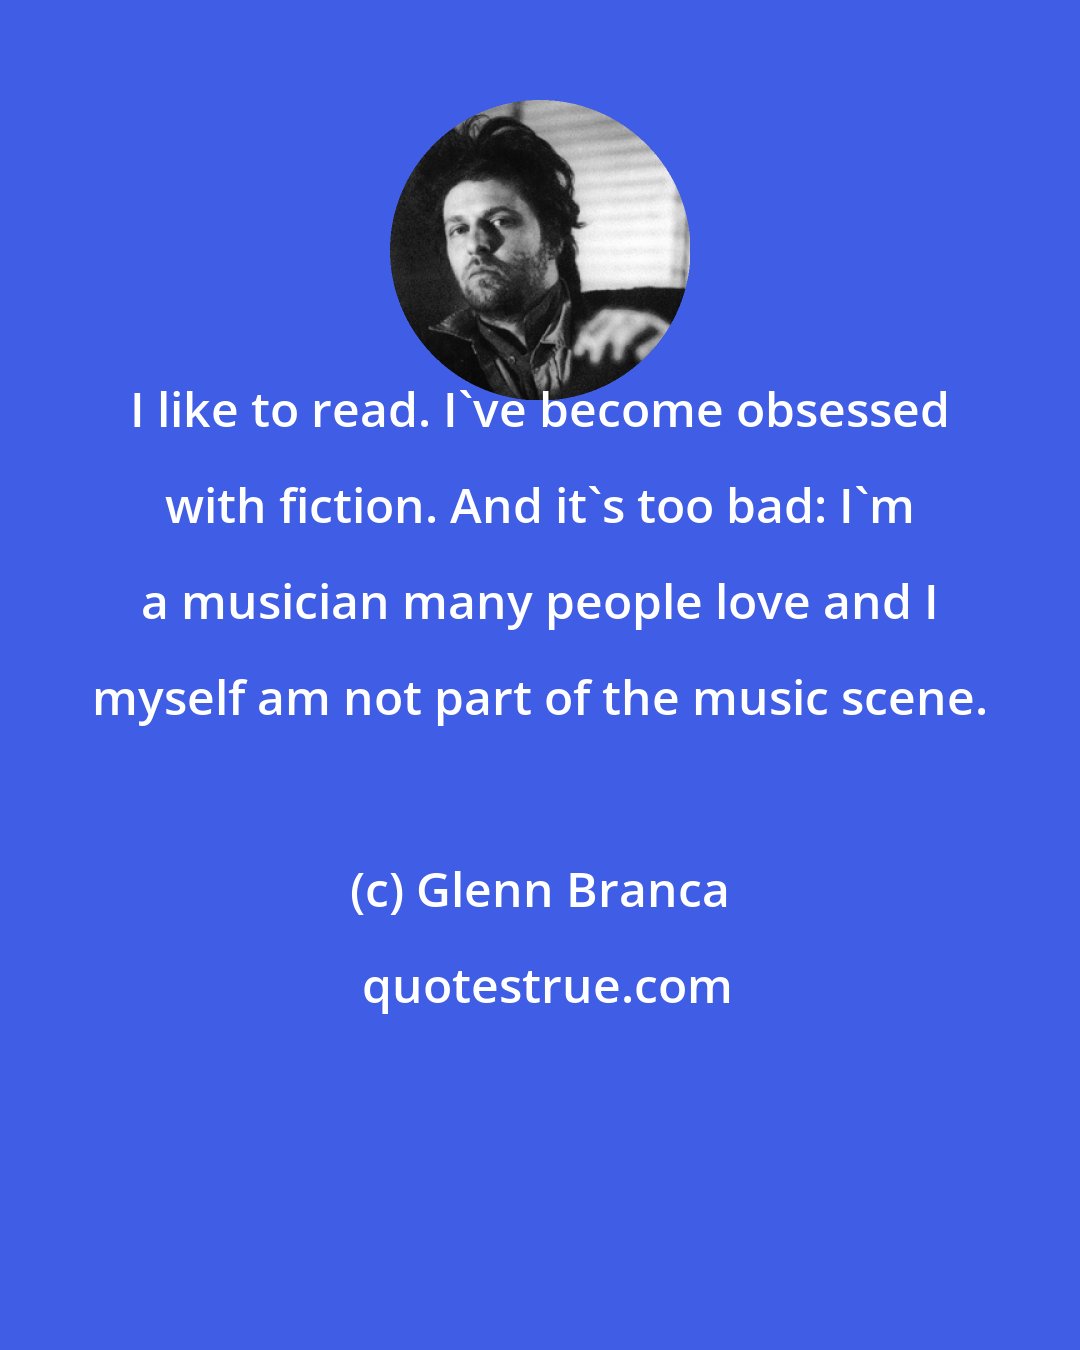 Glenn Branca: I like to read. I've become obsessed with fiction. And it's too bad: I'm a musician many people love and I myself am not part of the music scene.